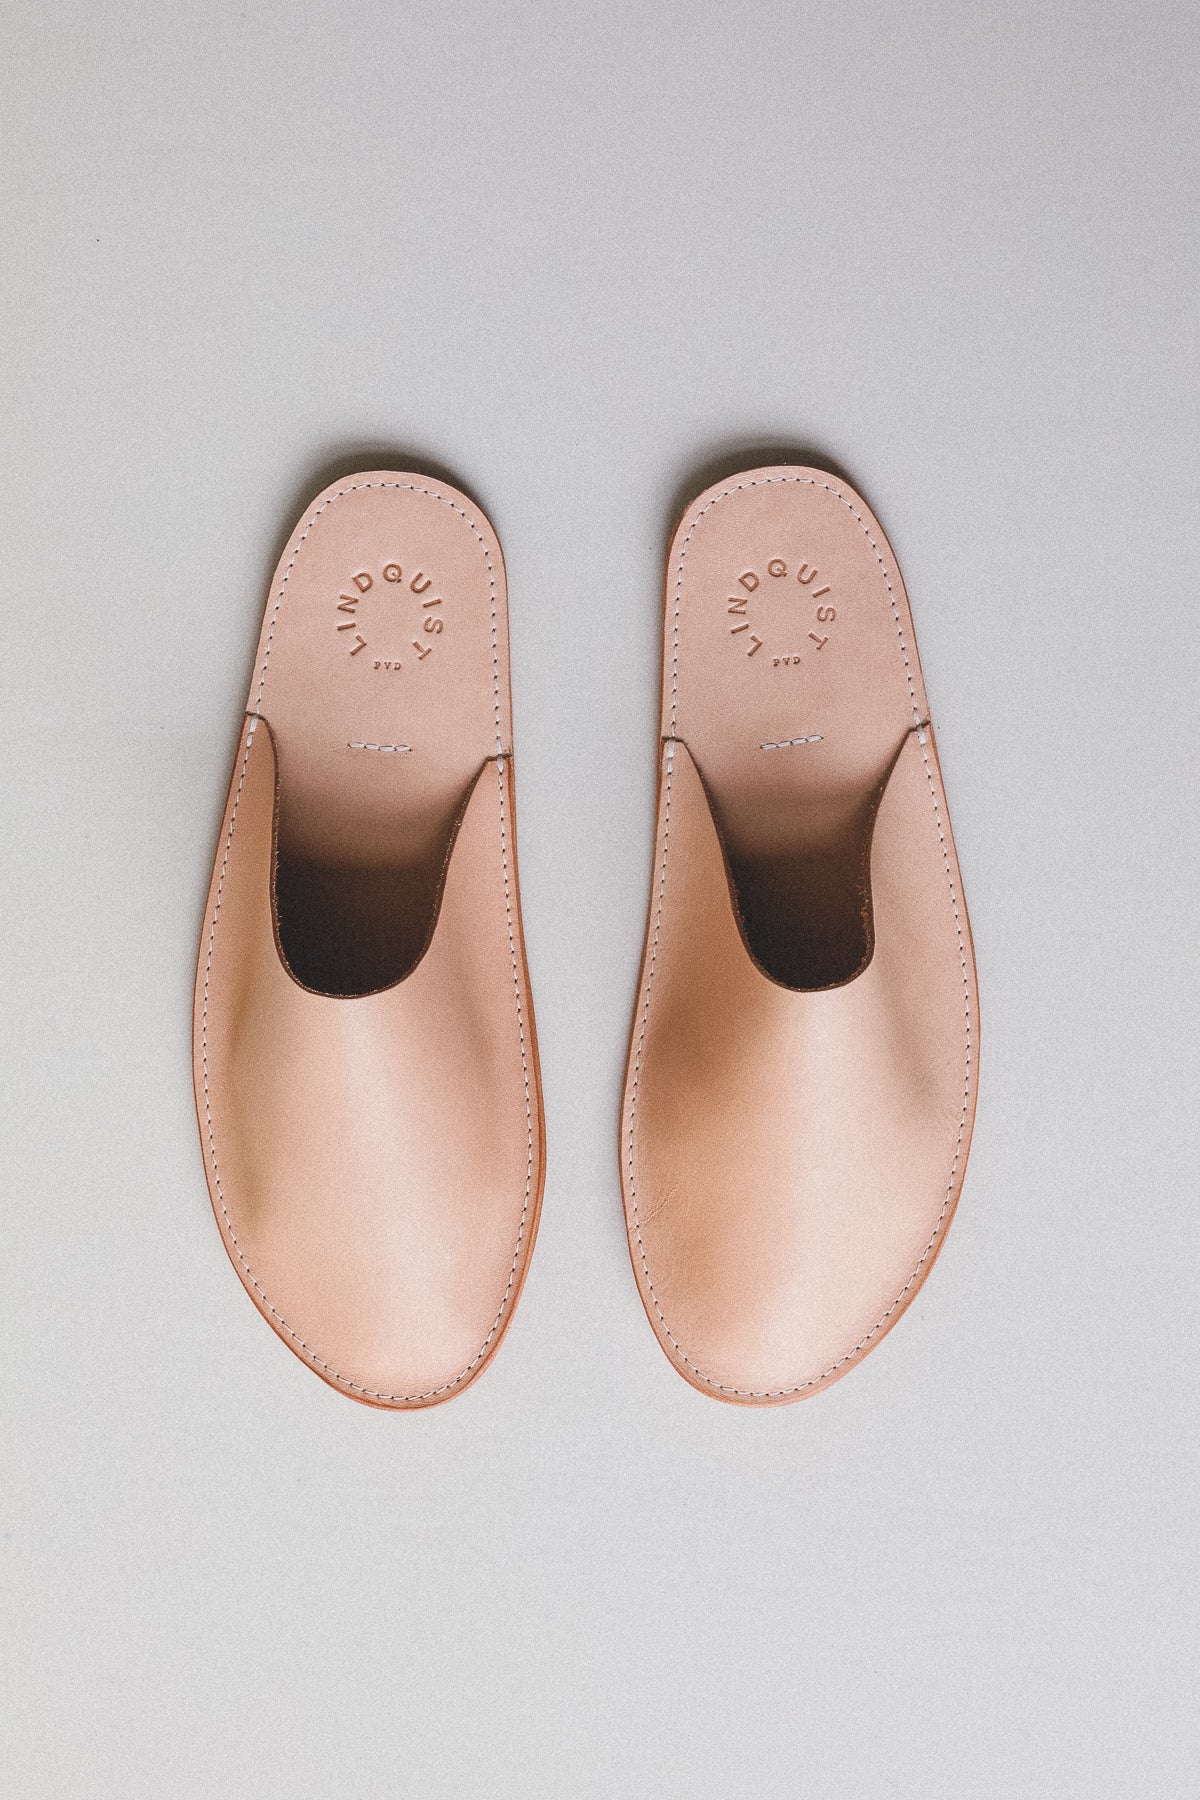 PAL IN NATURAL VACHETTA LEATHER — Shop Boswell